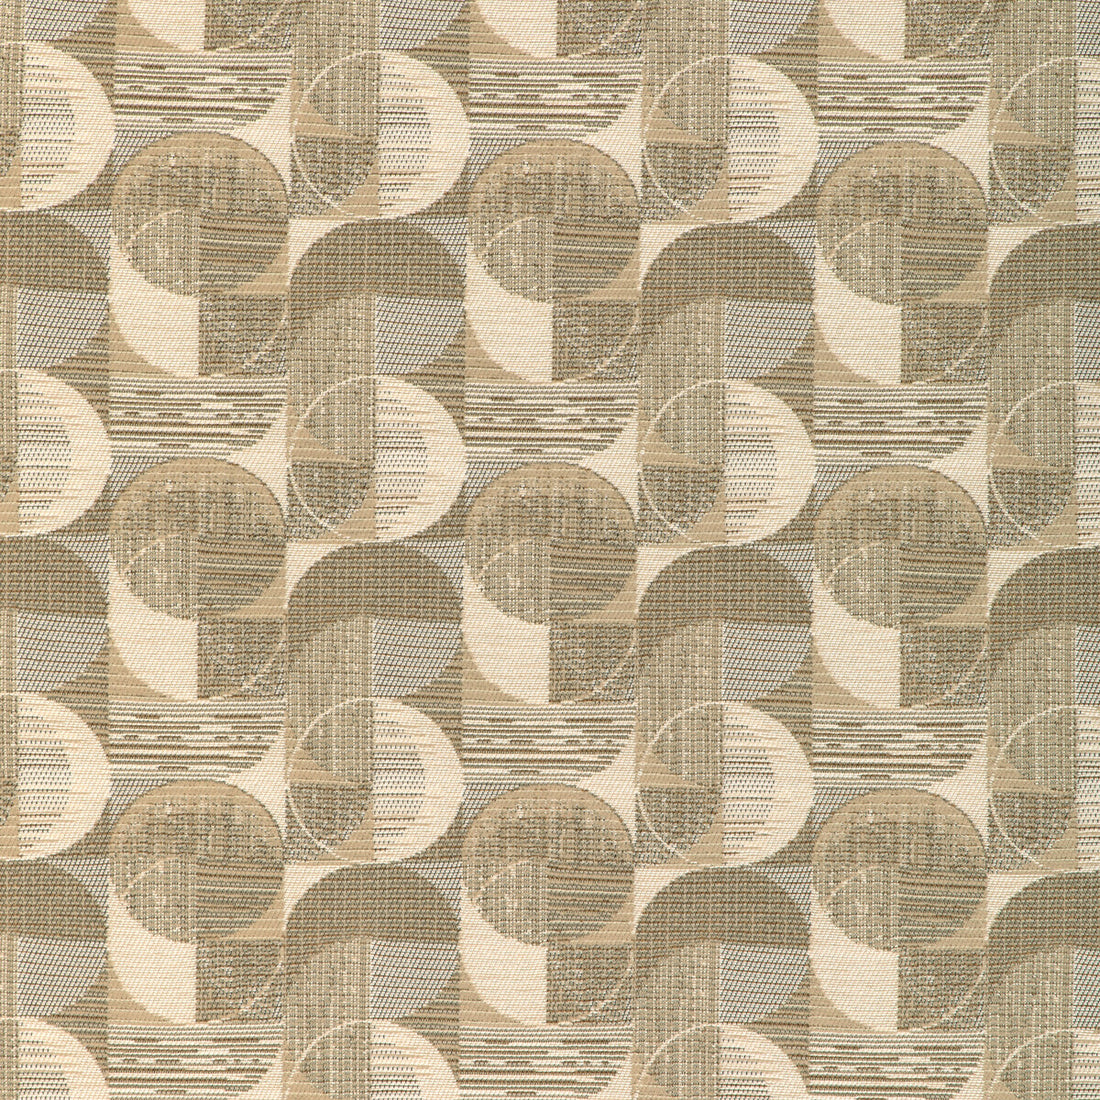 Daybreak fabric in sandstone color - pattern 37050.116.0 - by Kravet Contract in the Chesapeake collection